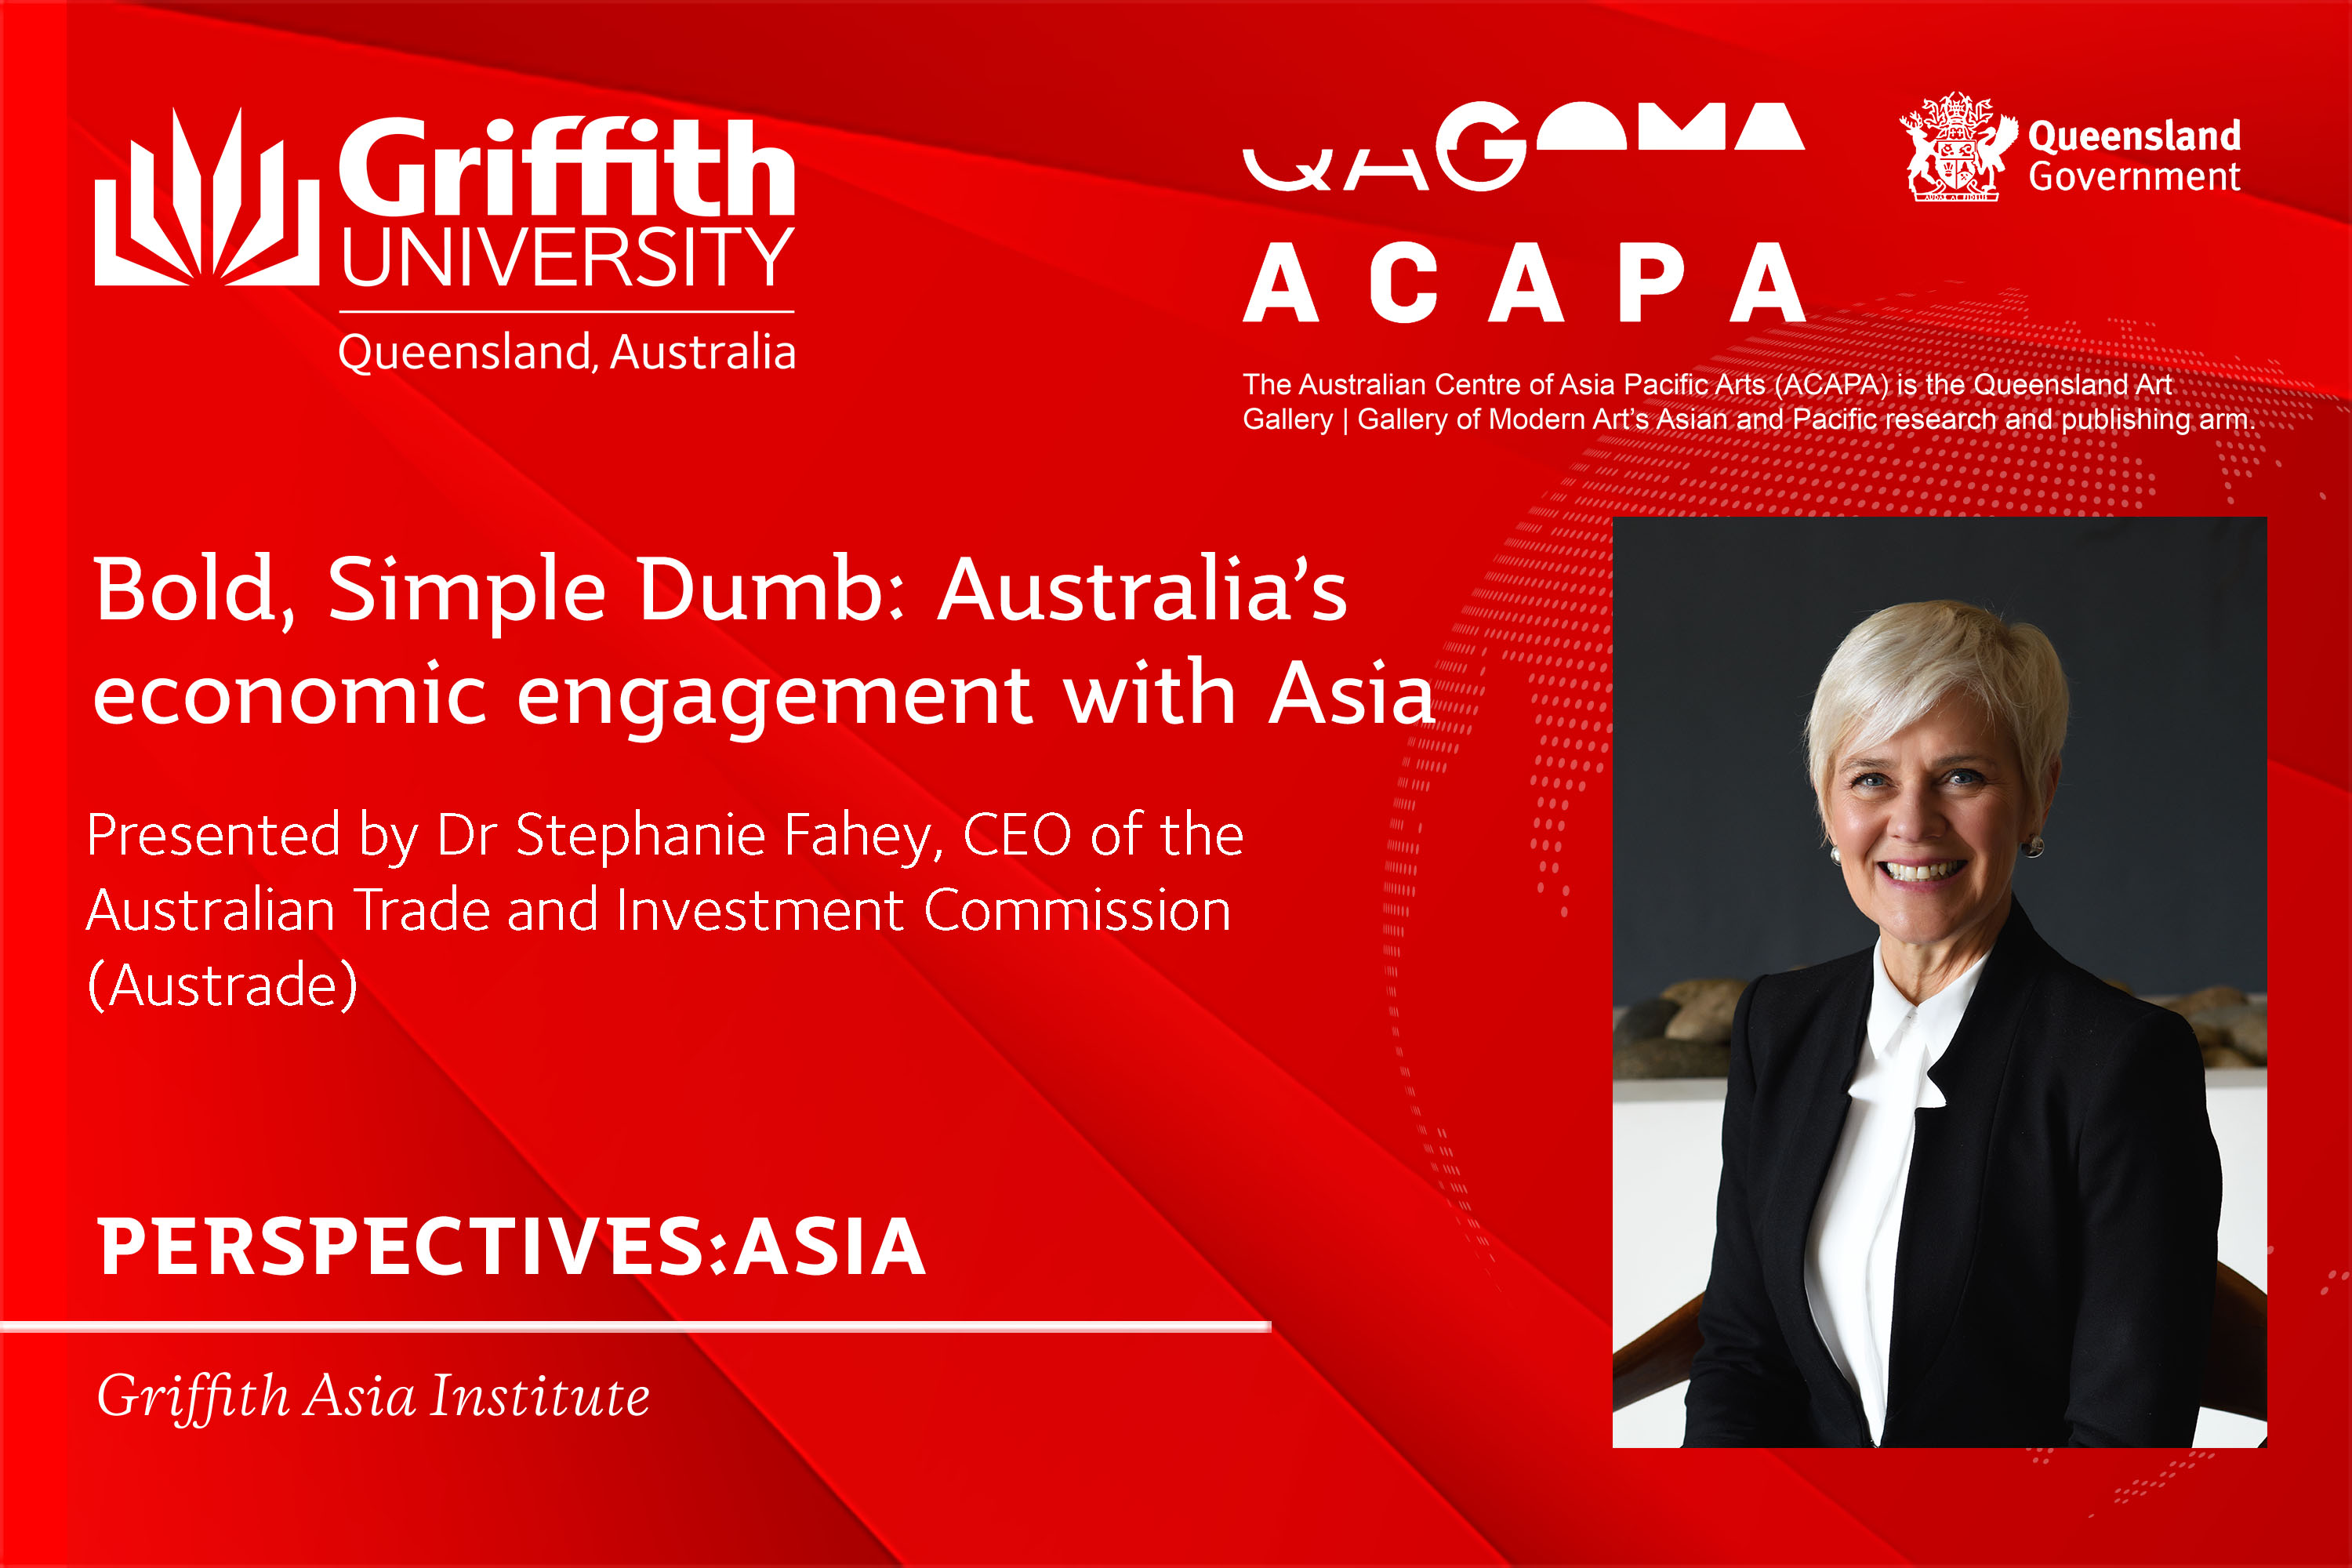 PERSPECTIVES:ASIA | Bold, Simple or Dumb: Australia's economic engagement with Asia. 